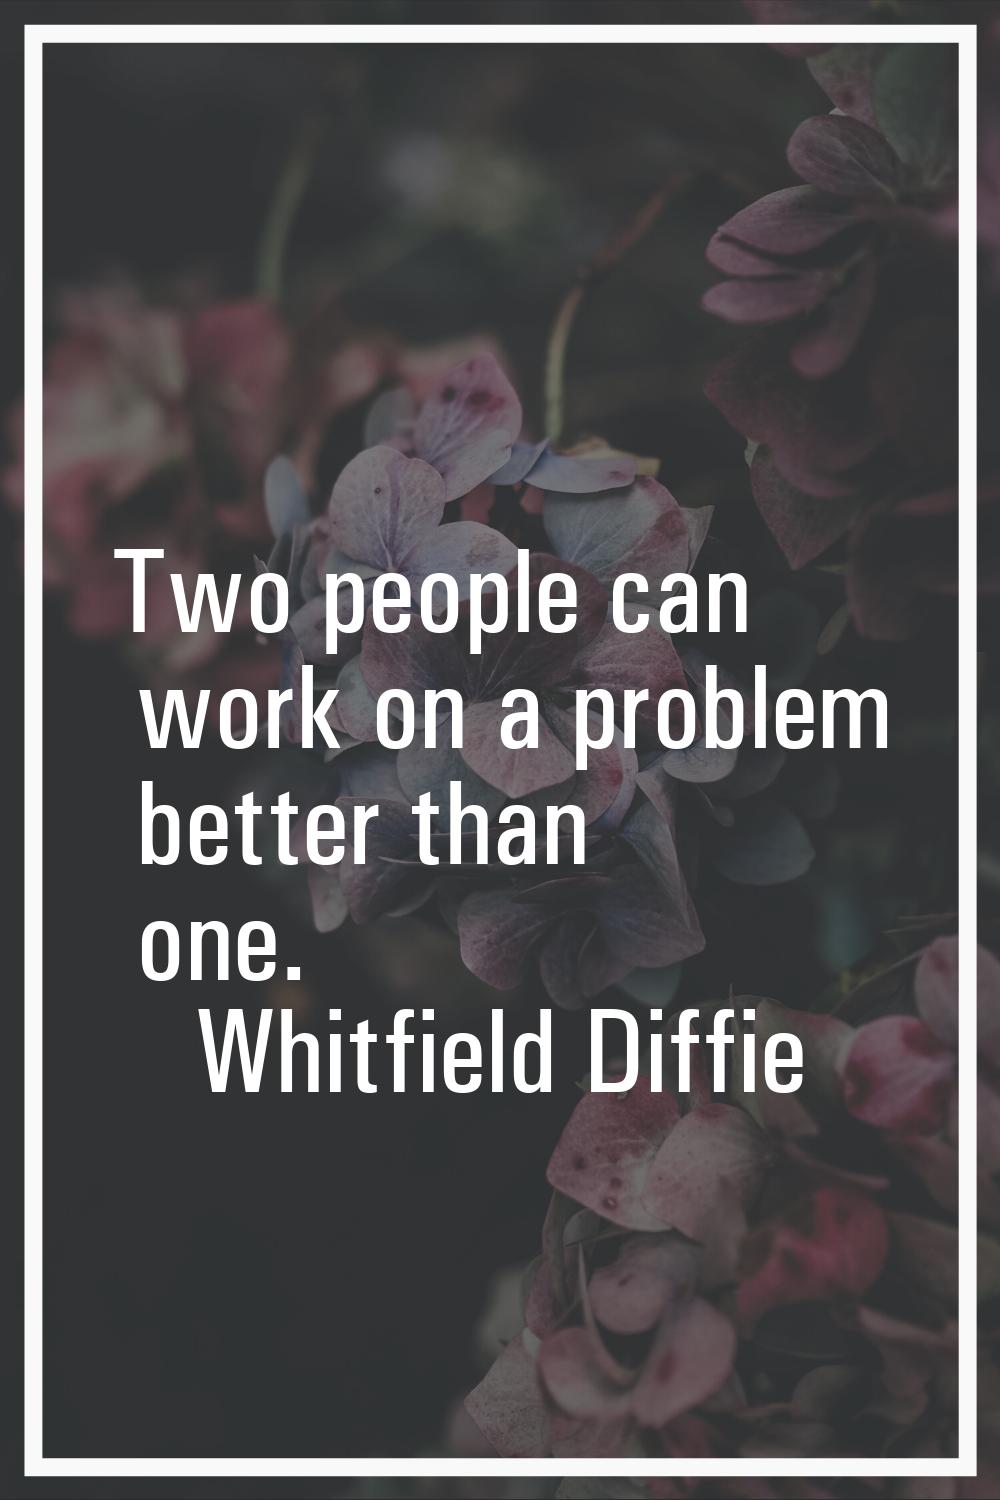 Two people can work on a problem better than one.